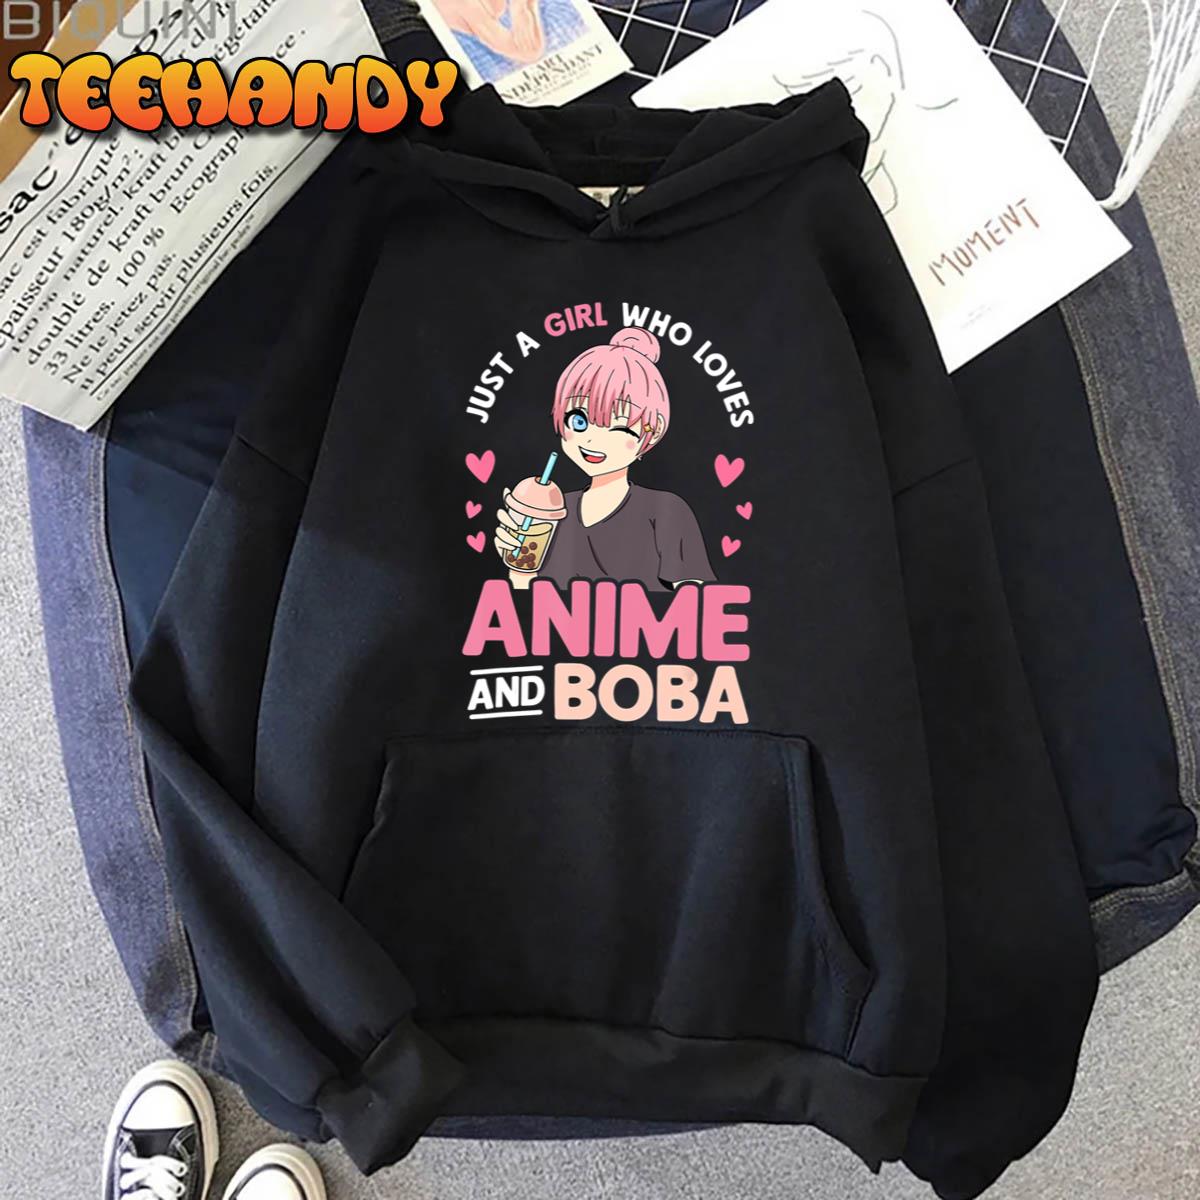 And Just Girls Boba Lover Who Girl Teen A Anime Tea Loves Unisex T-Shirt